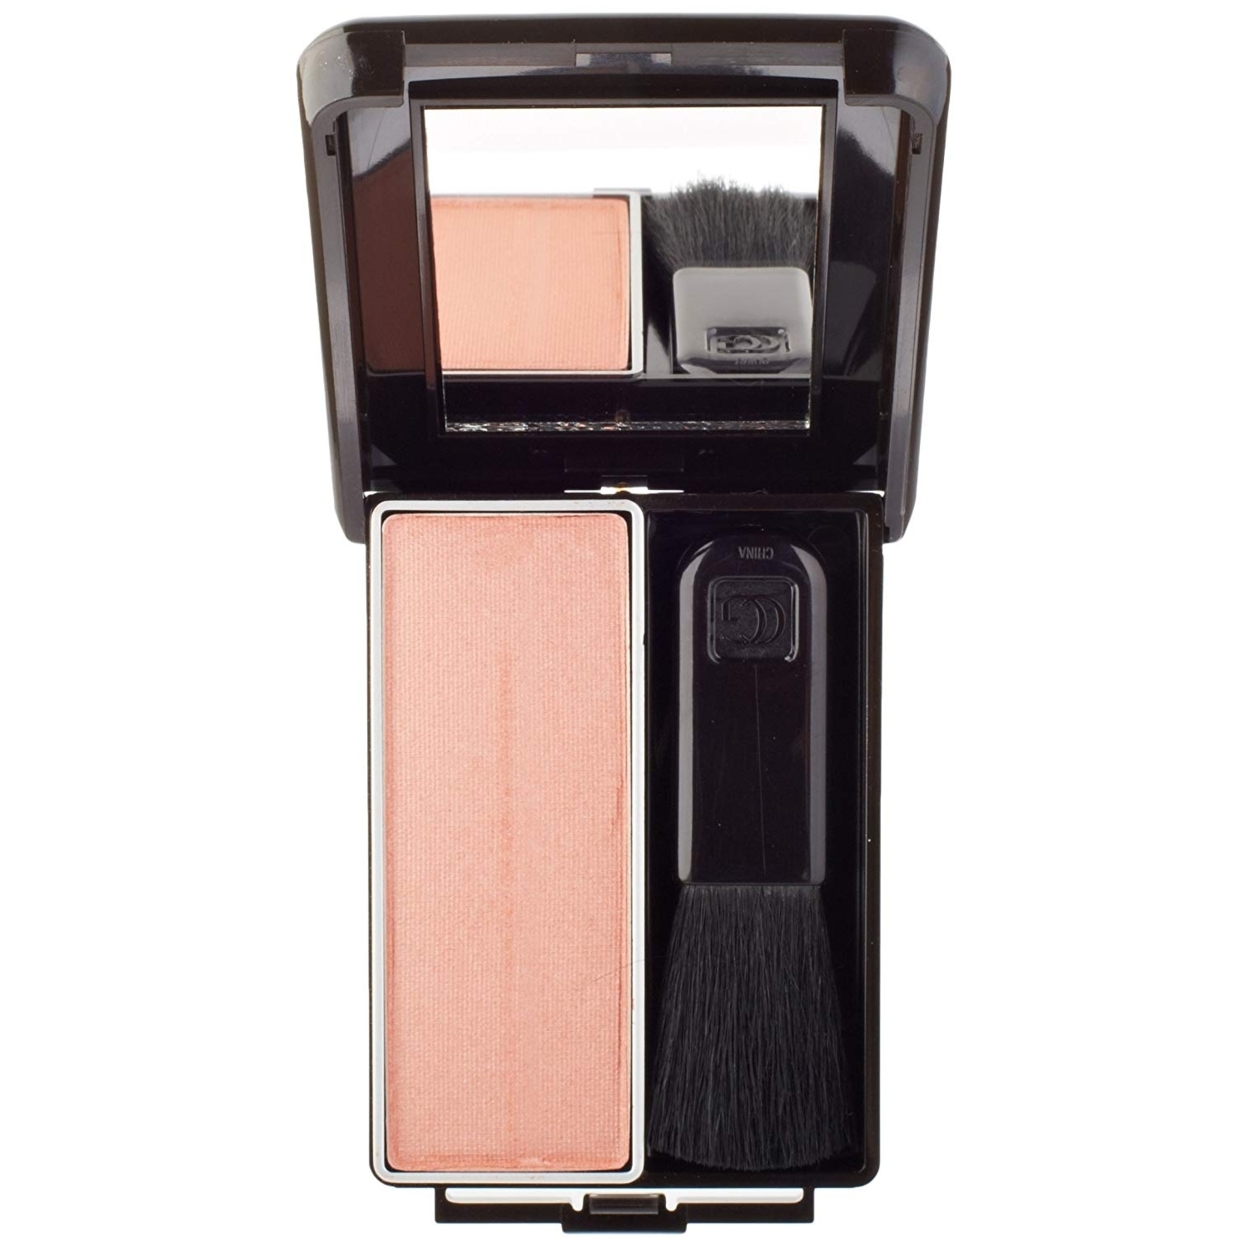 CoverGirl Classic Color Blush Soft Mink(N) 590, 0.27-Ounce Pa